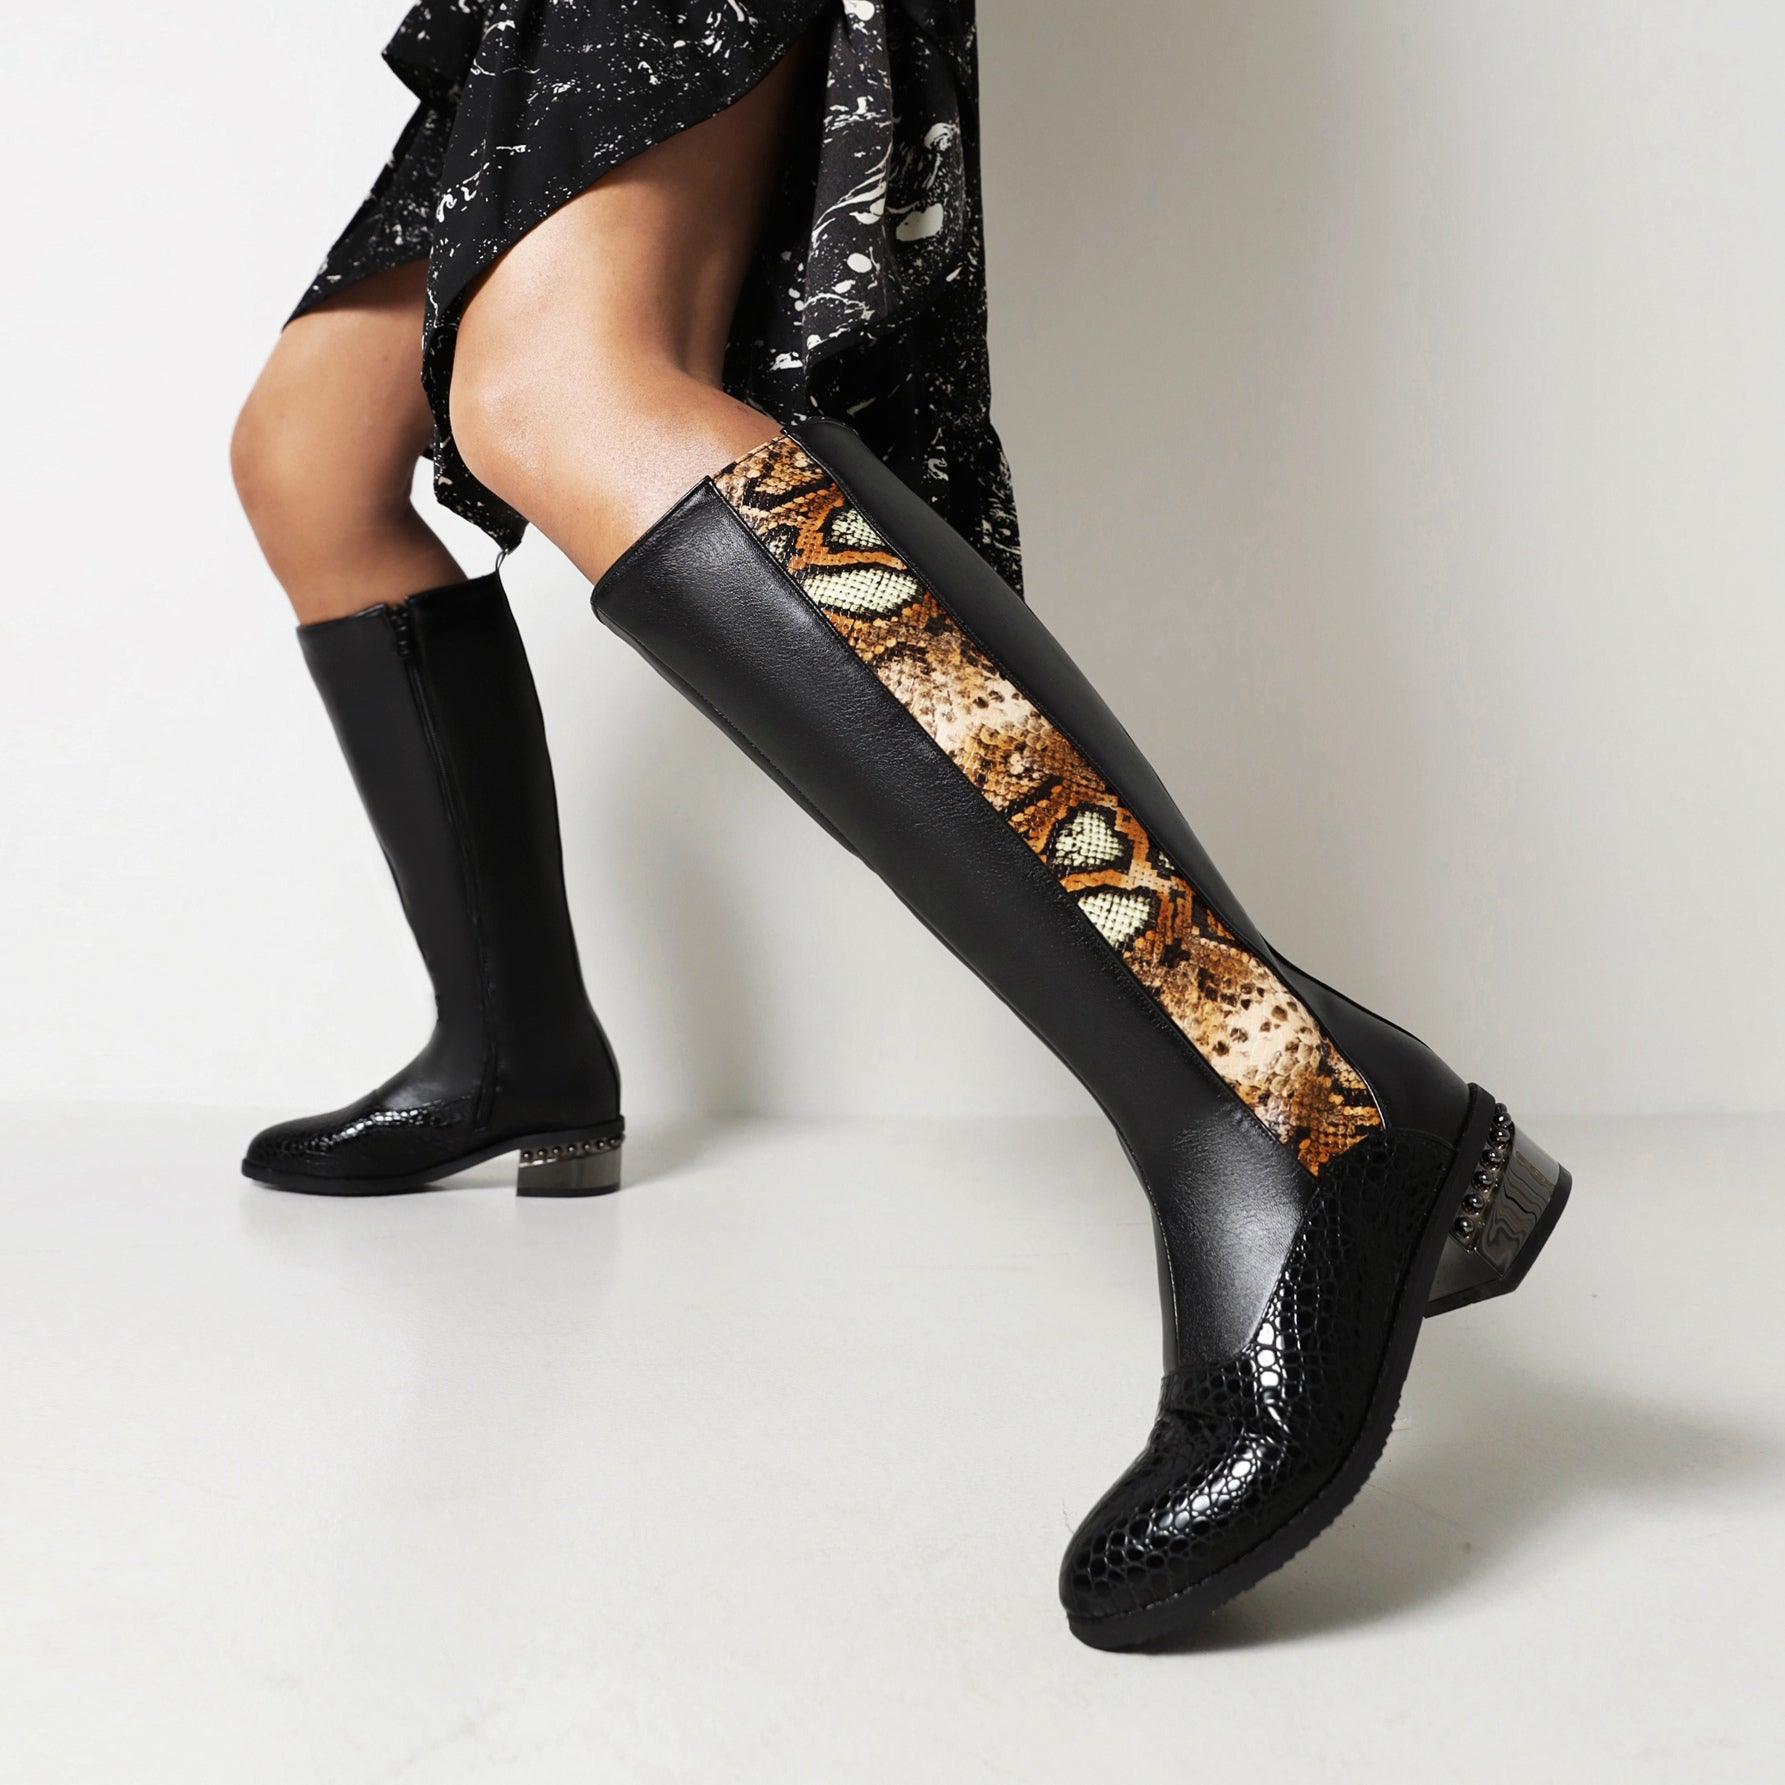 Bigsizeheels Concise snake print round toe over-the-knee boots-Black freeshipping - bigsizeheel®-size5-size15 -All Plus Sizes Available!